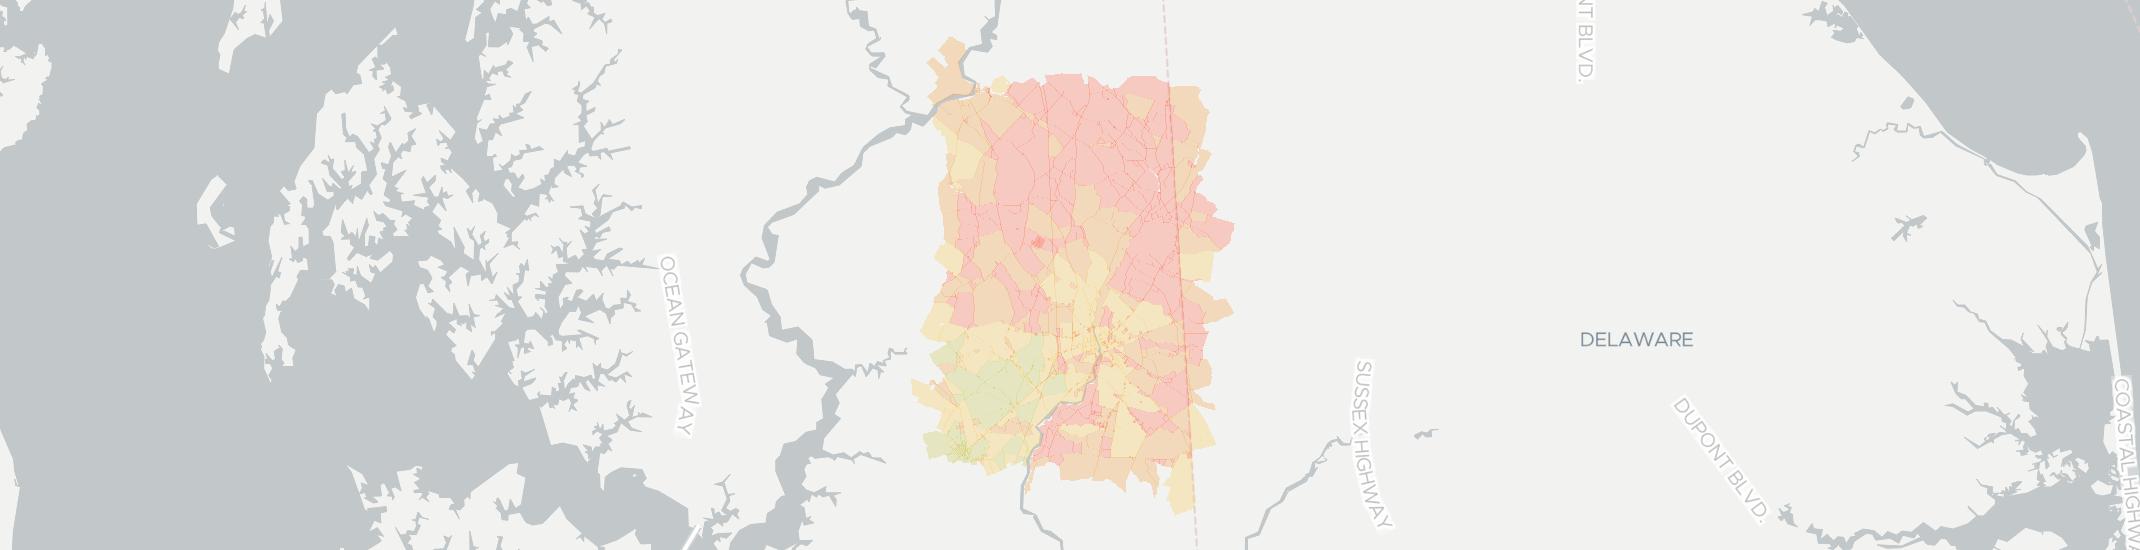 Federalsburg Internet Competition Map. Click for interactive map.